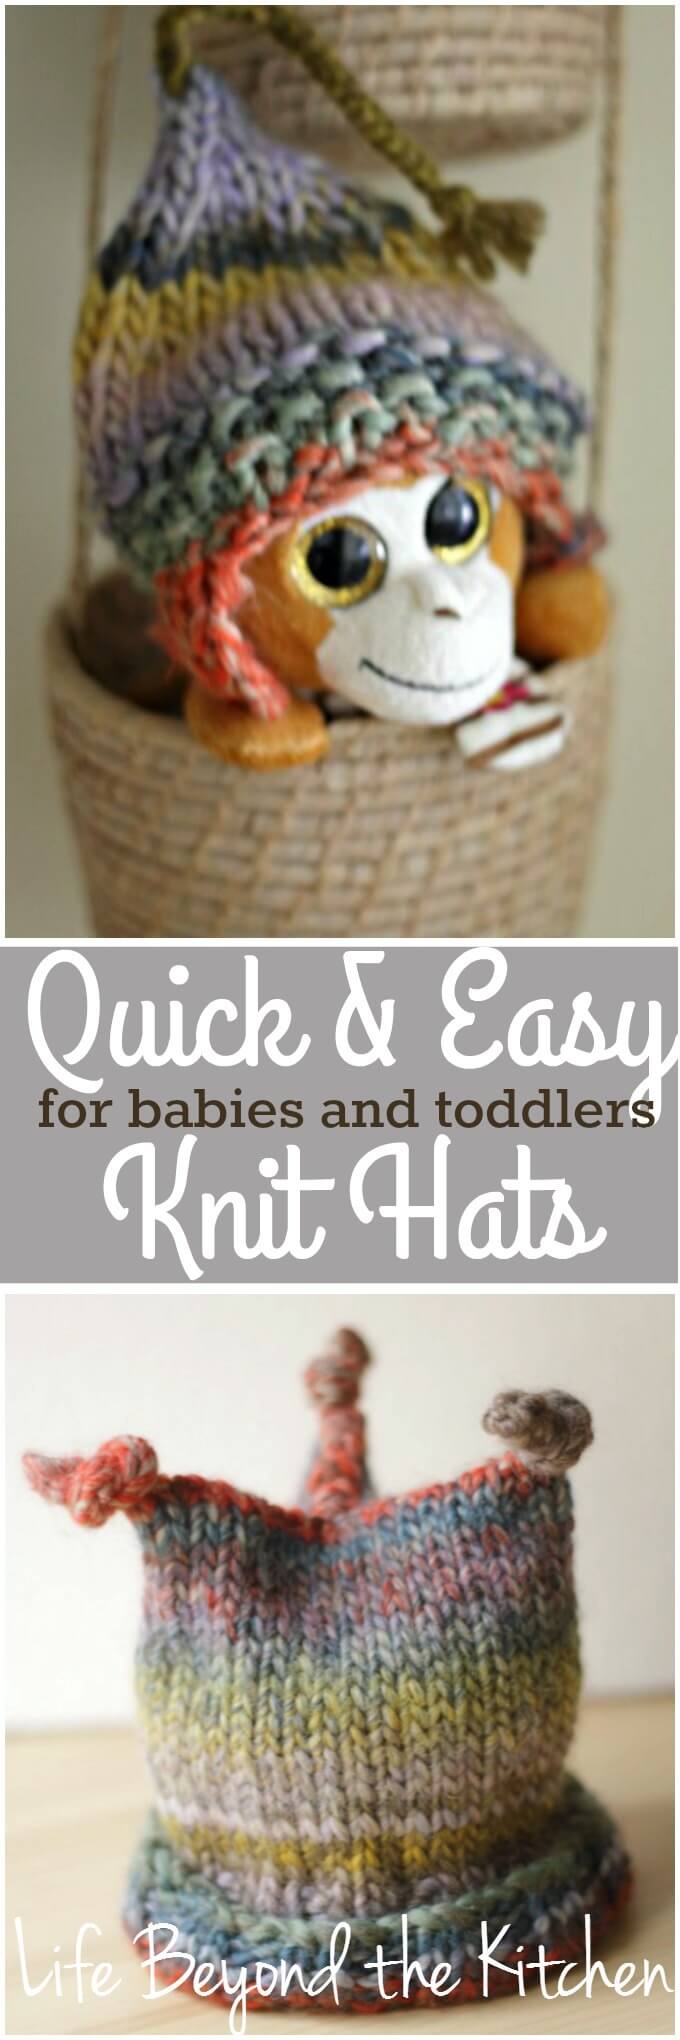 Quick & Easy Knit Hats For Babies and Toddlers ~ Life Beyond the Kitchen